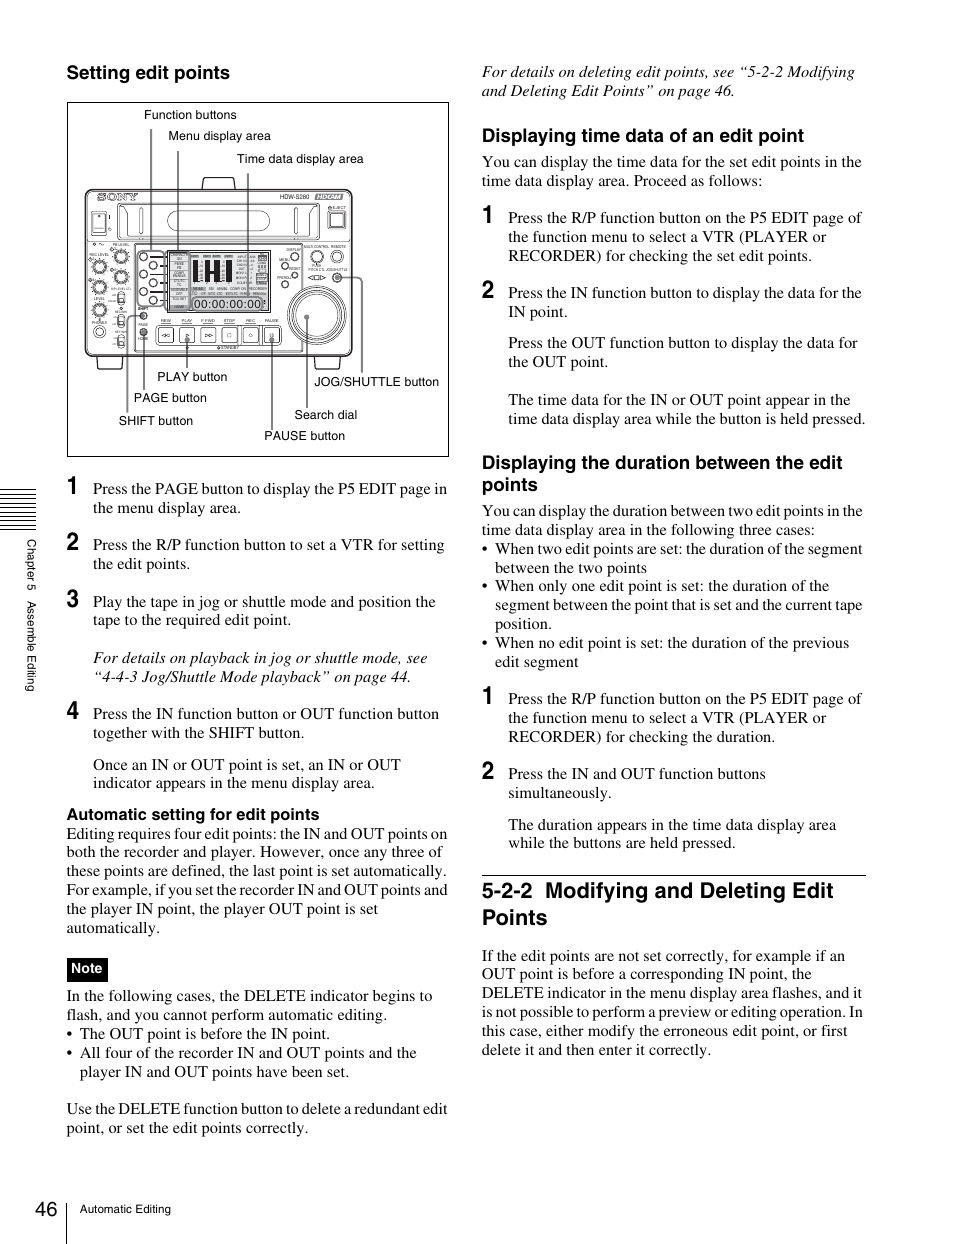 2-2 modifying and deleting edit points, Modifying and deleting edit points, Setting edit points | Displaying time data of an edit point, Displaying the duration between the edit points | Sony HDW-S280 User Manual | Page 46 / 94